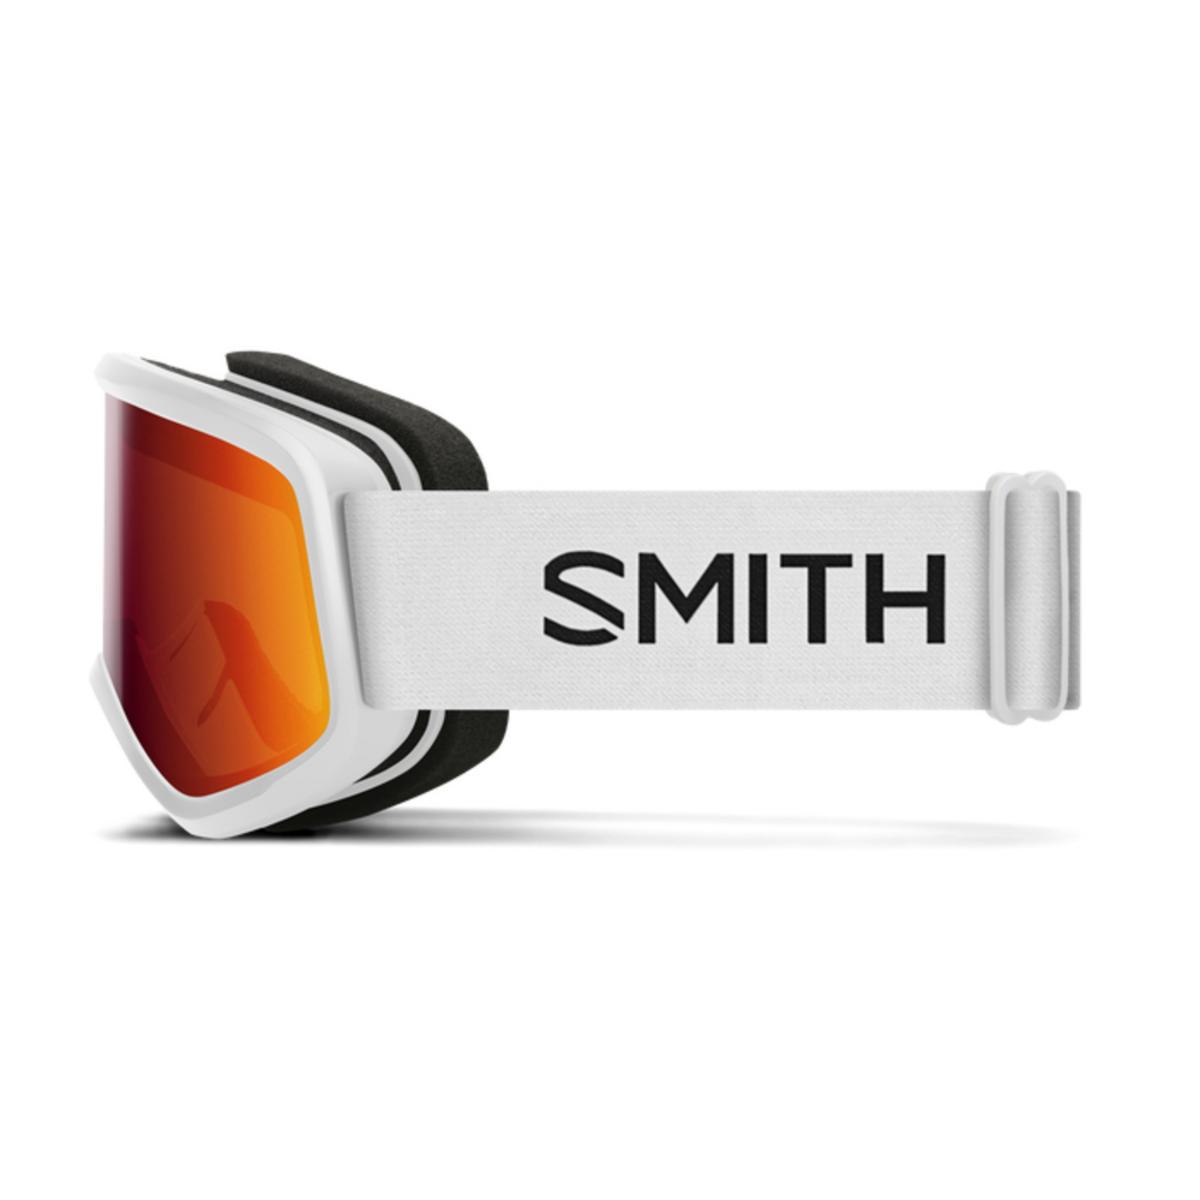 Smith Optics Snowday Youth Goggles Red Sol-X Mirror - White Frame